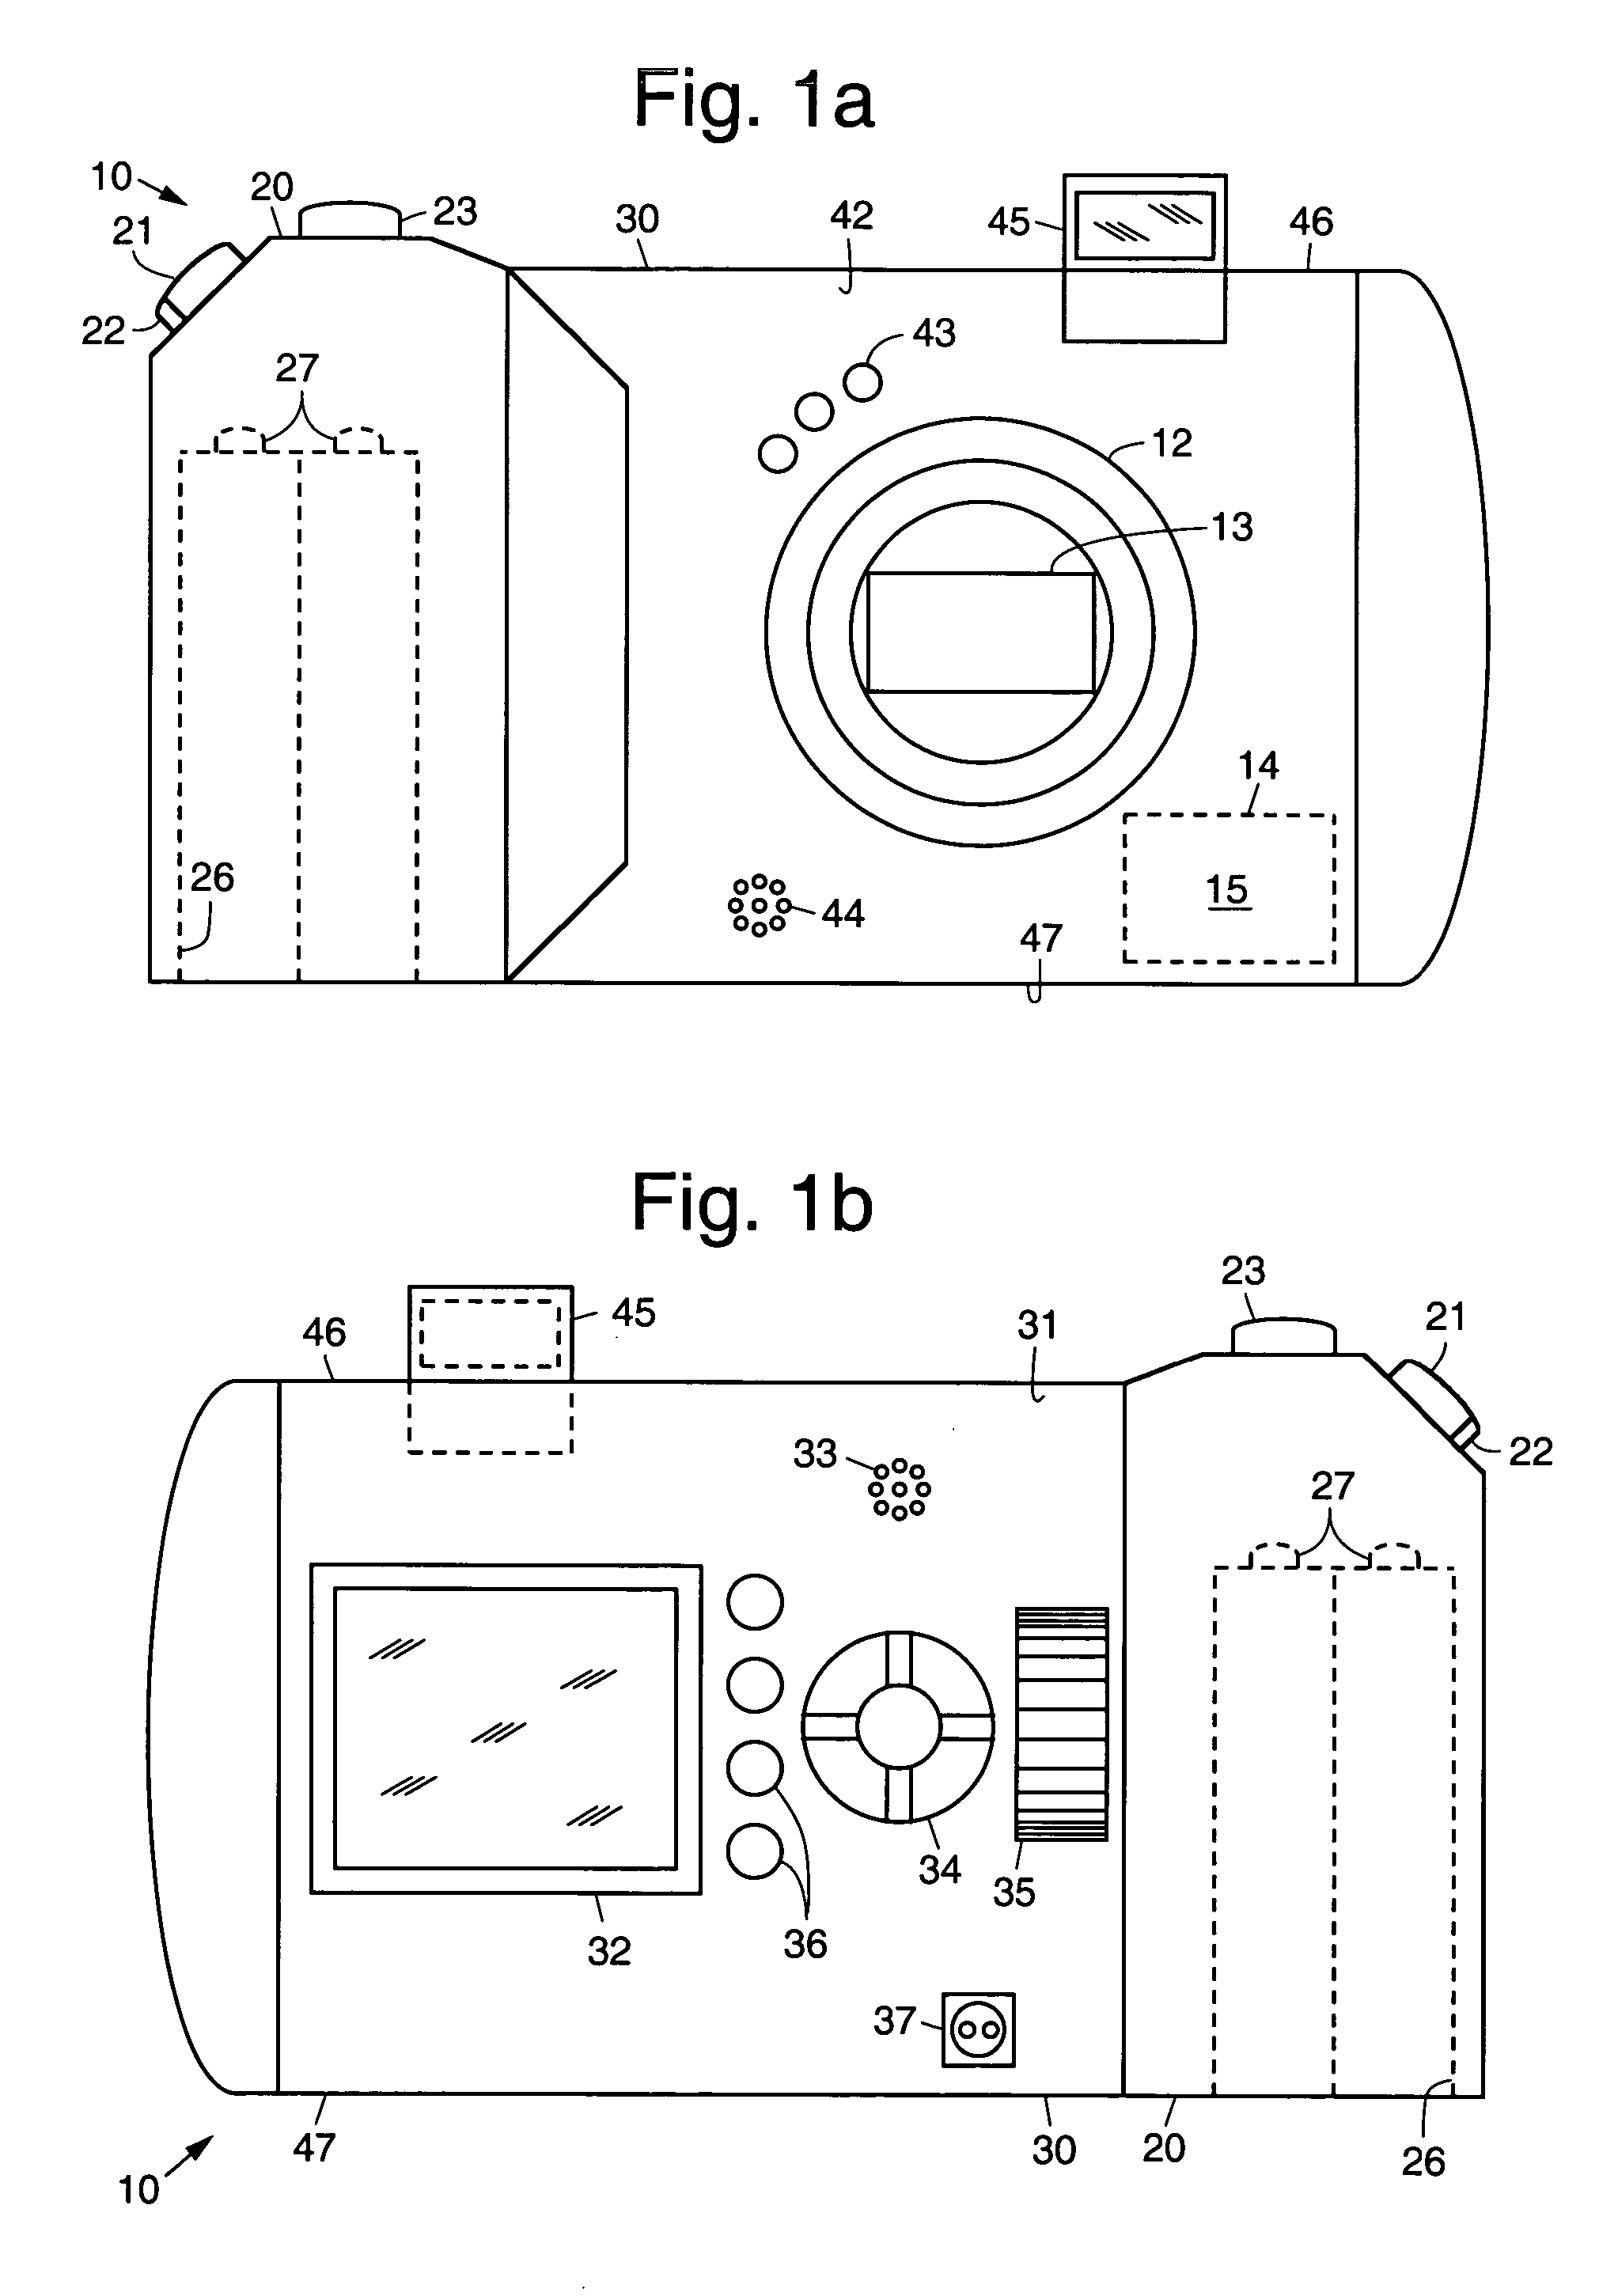 Digital camera with automatic mode detection